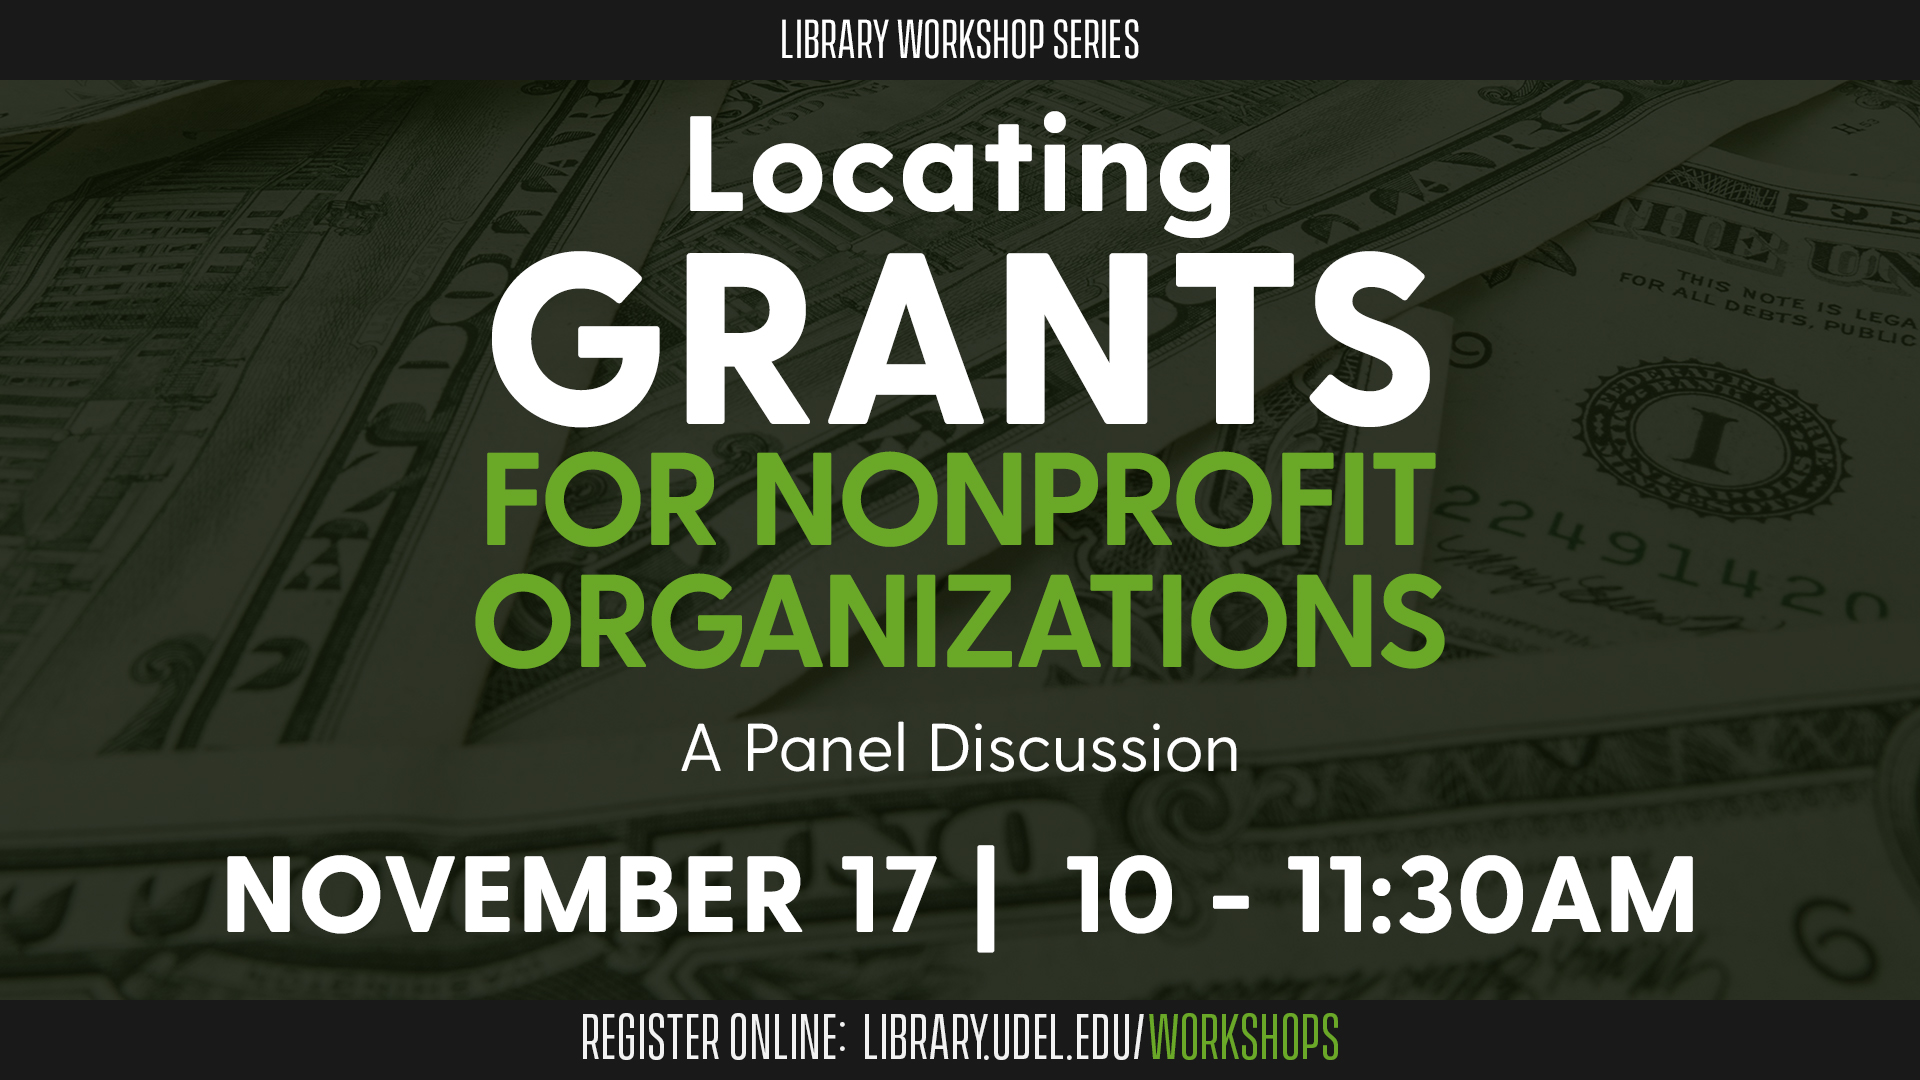 Locating Grants for Nonprofit Organizations: A Panel Discussion